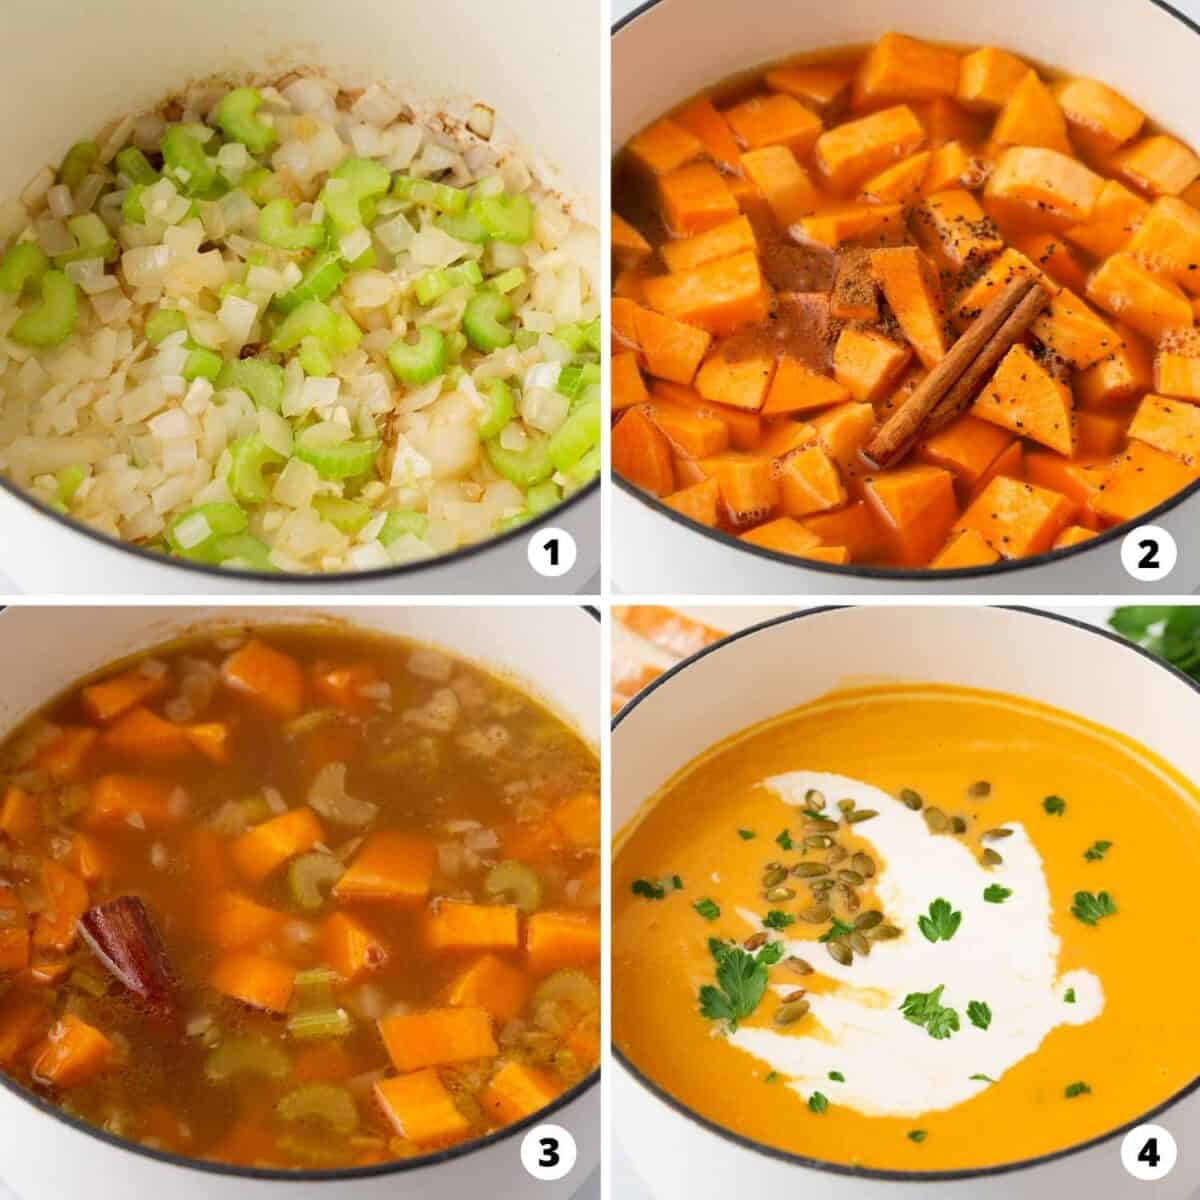 Showing how to cook sweet potato soup in a 4 step collage.